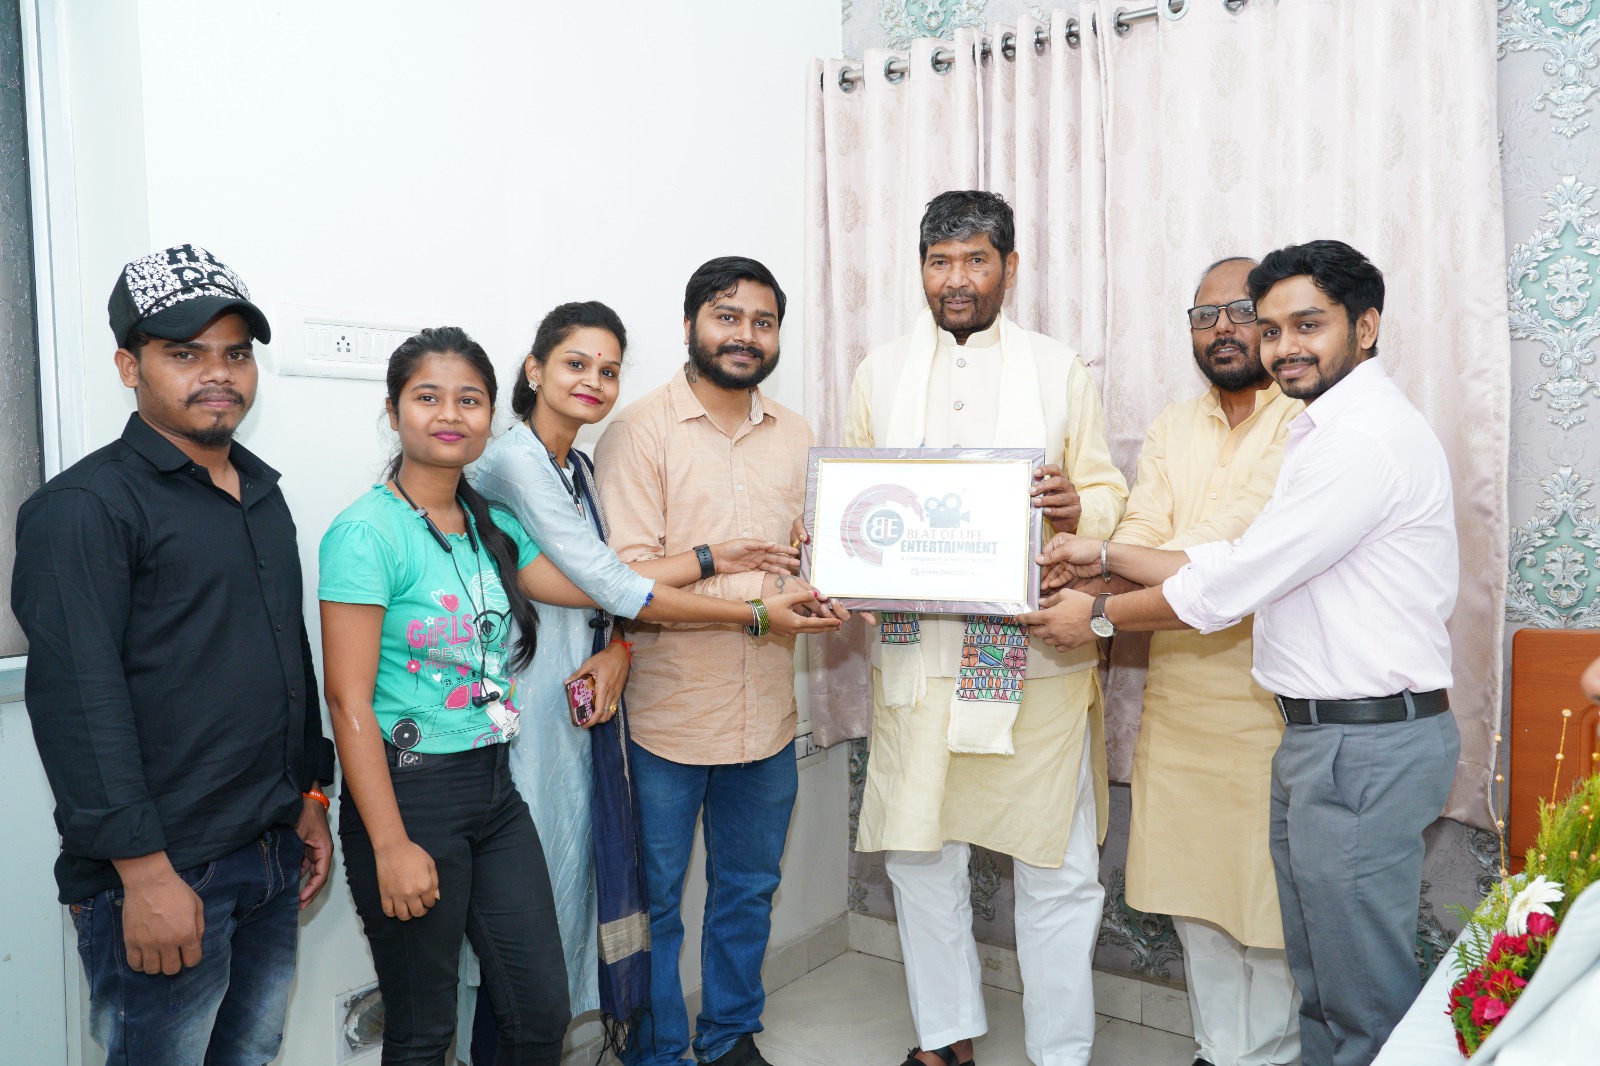 Beat of Life Entertainment Team Meets Pashupati Paras, the Union Minister of the Indian Government  